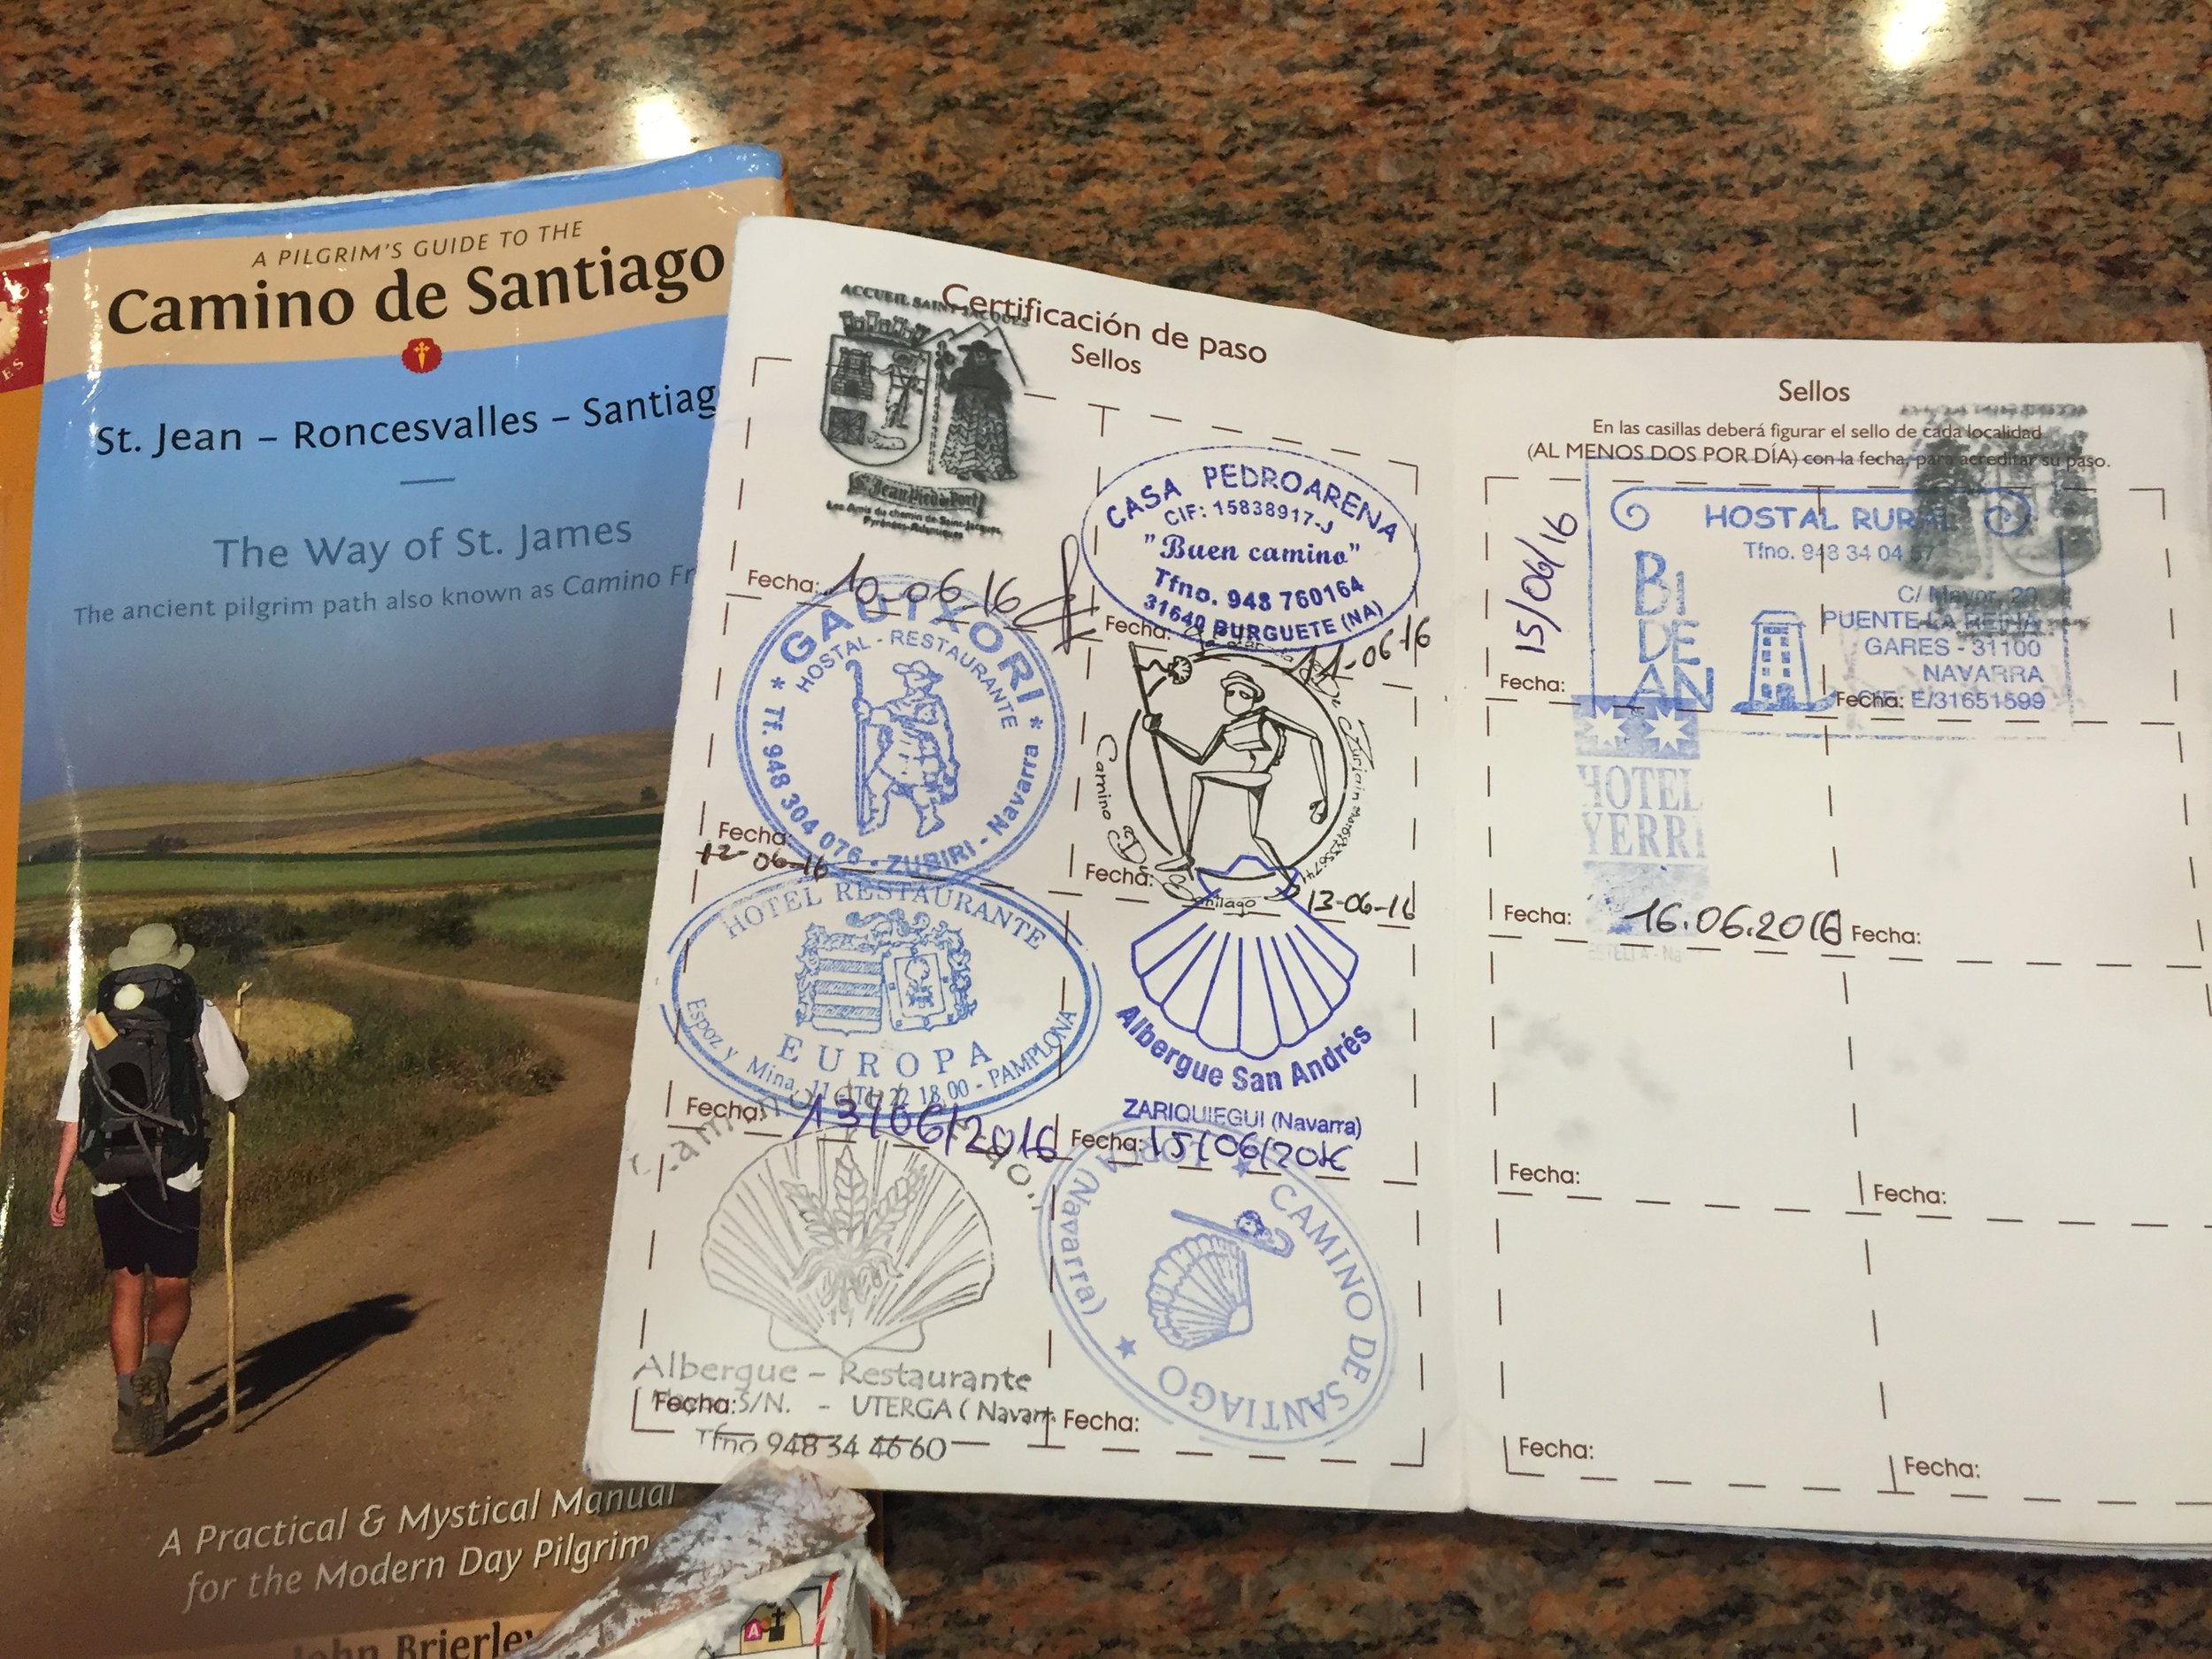 More stamps in passport